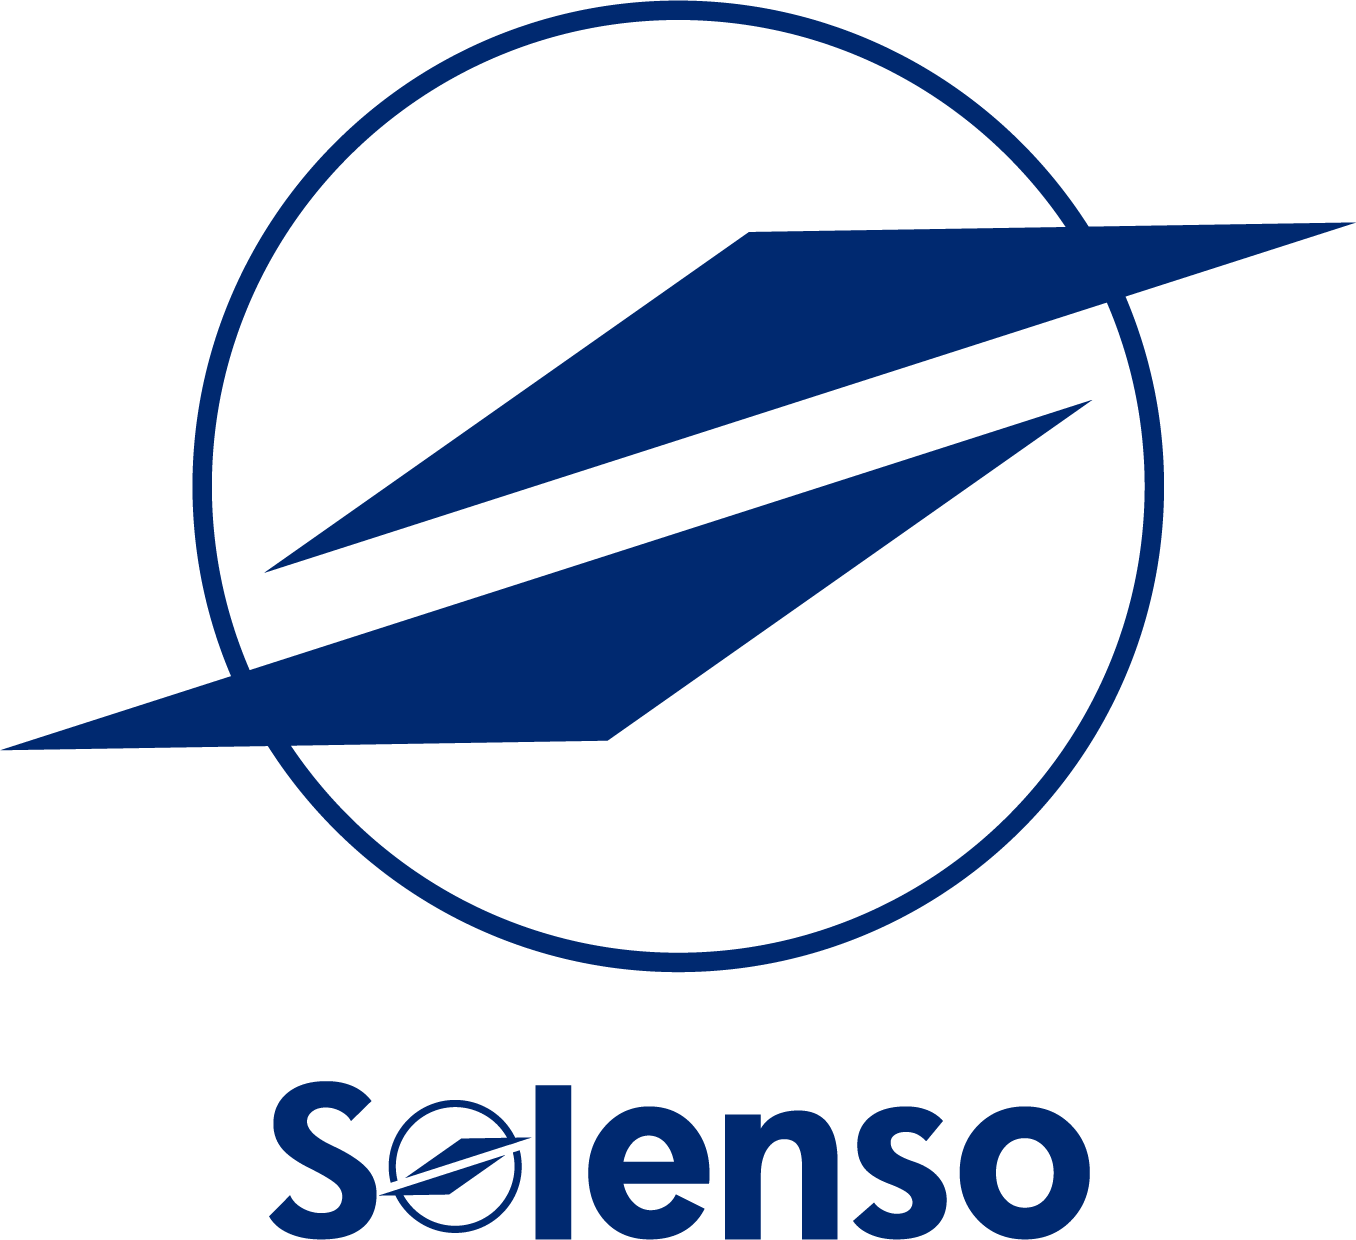 Solenso